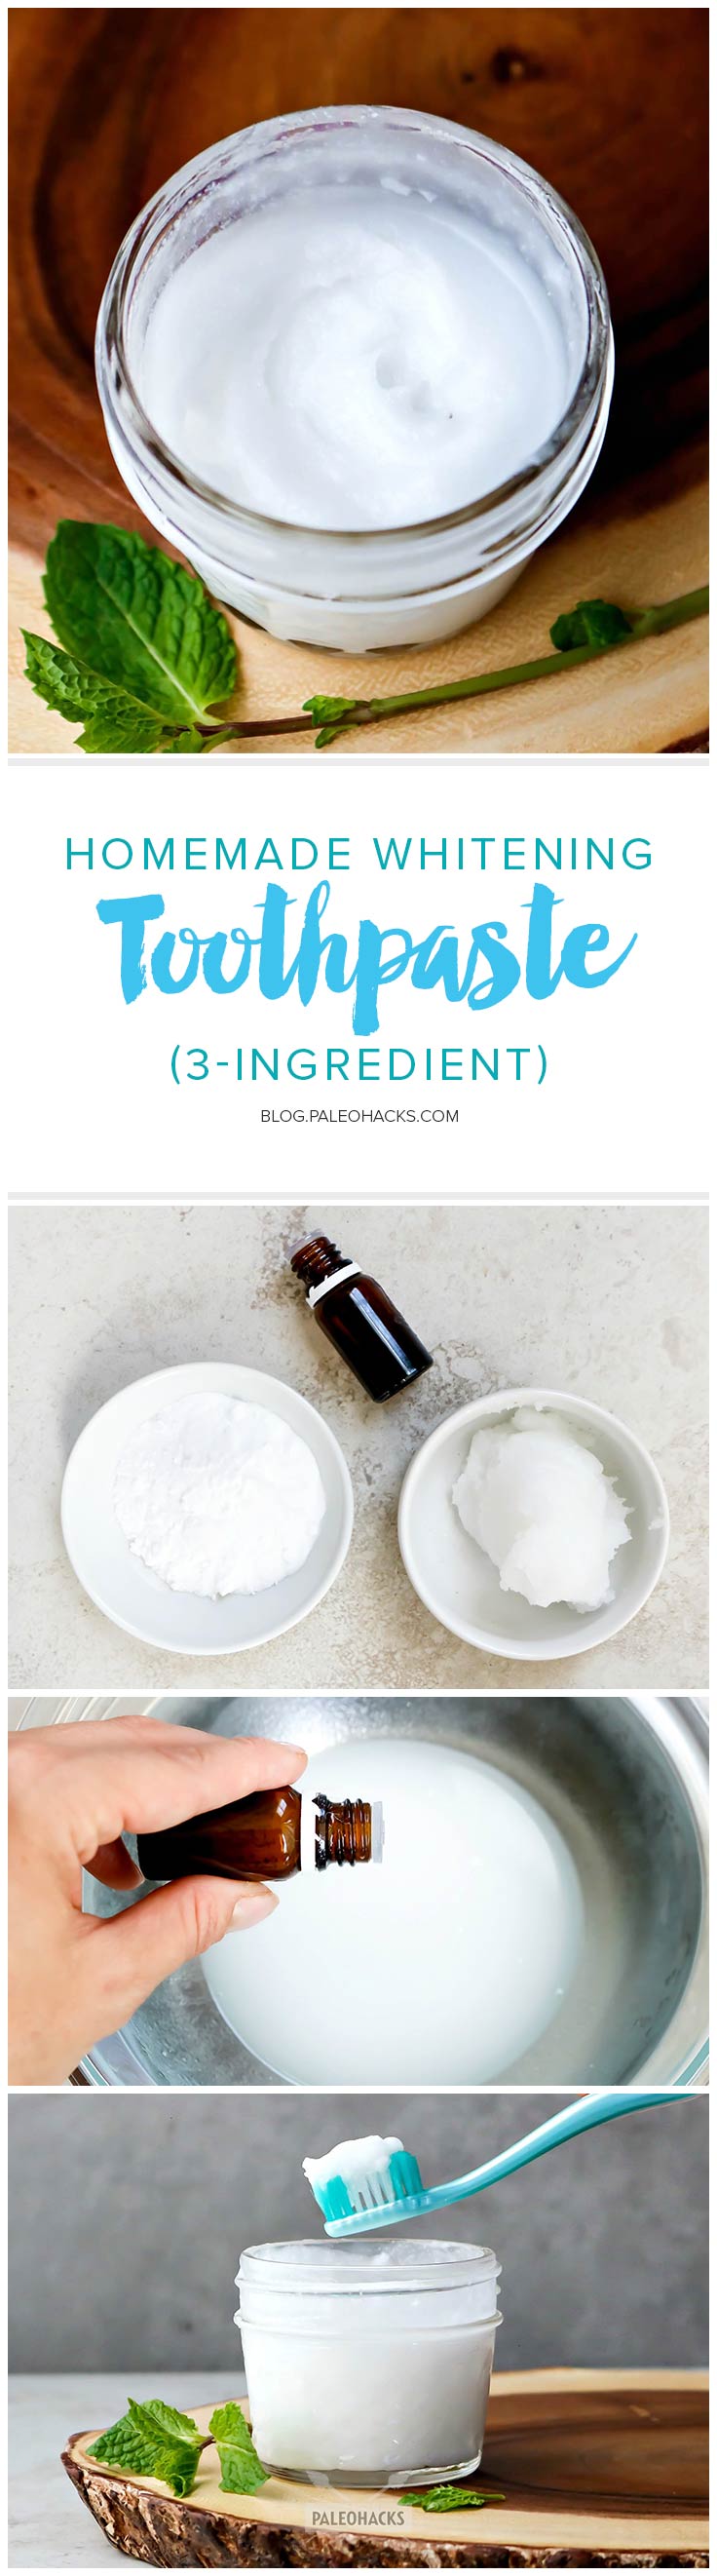 Brightening your smile has never been easier! Whiten your teeth with this super easy 3-ingredient whitening toothpaste.